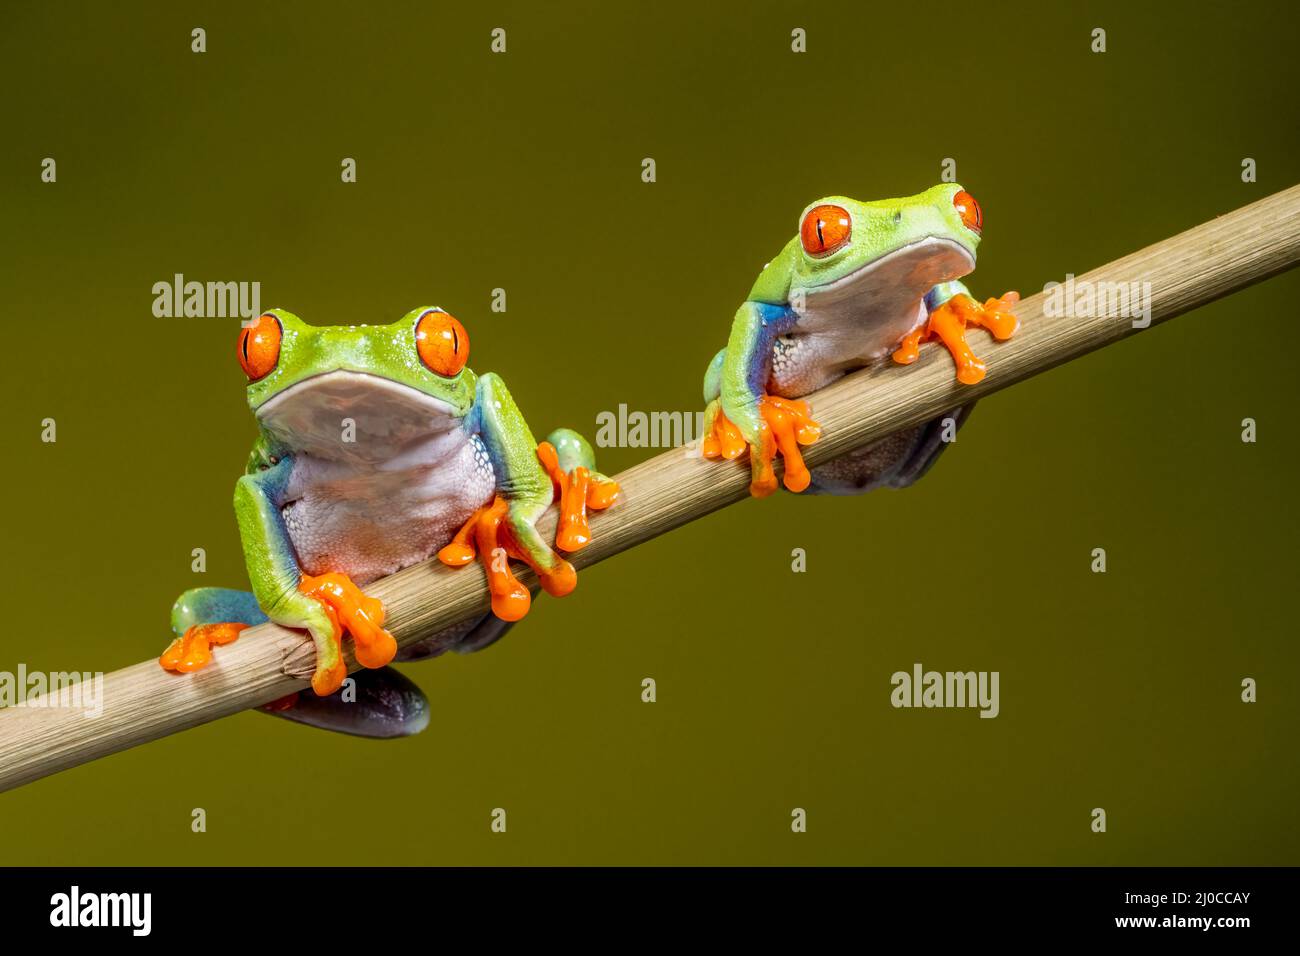 Male (R) and female (L) Red Eyed Tree Frogs (Agalychnis callidryas), sitting on a plant stem and facing front Stock Photo